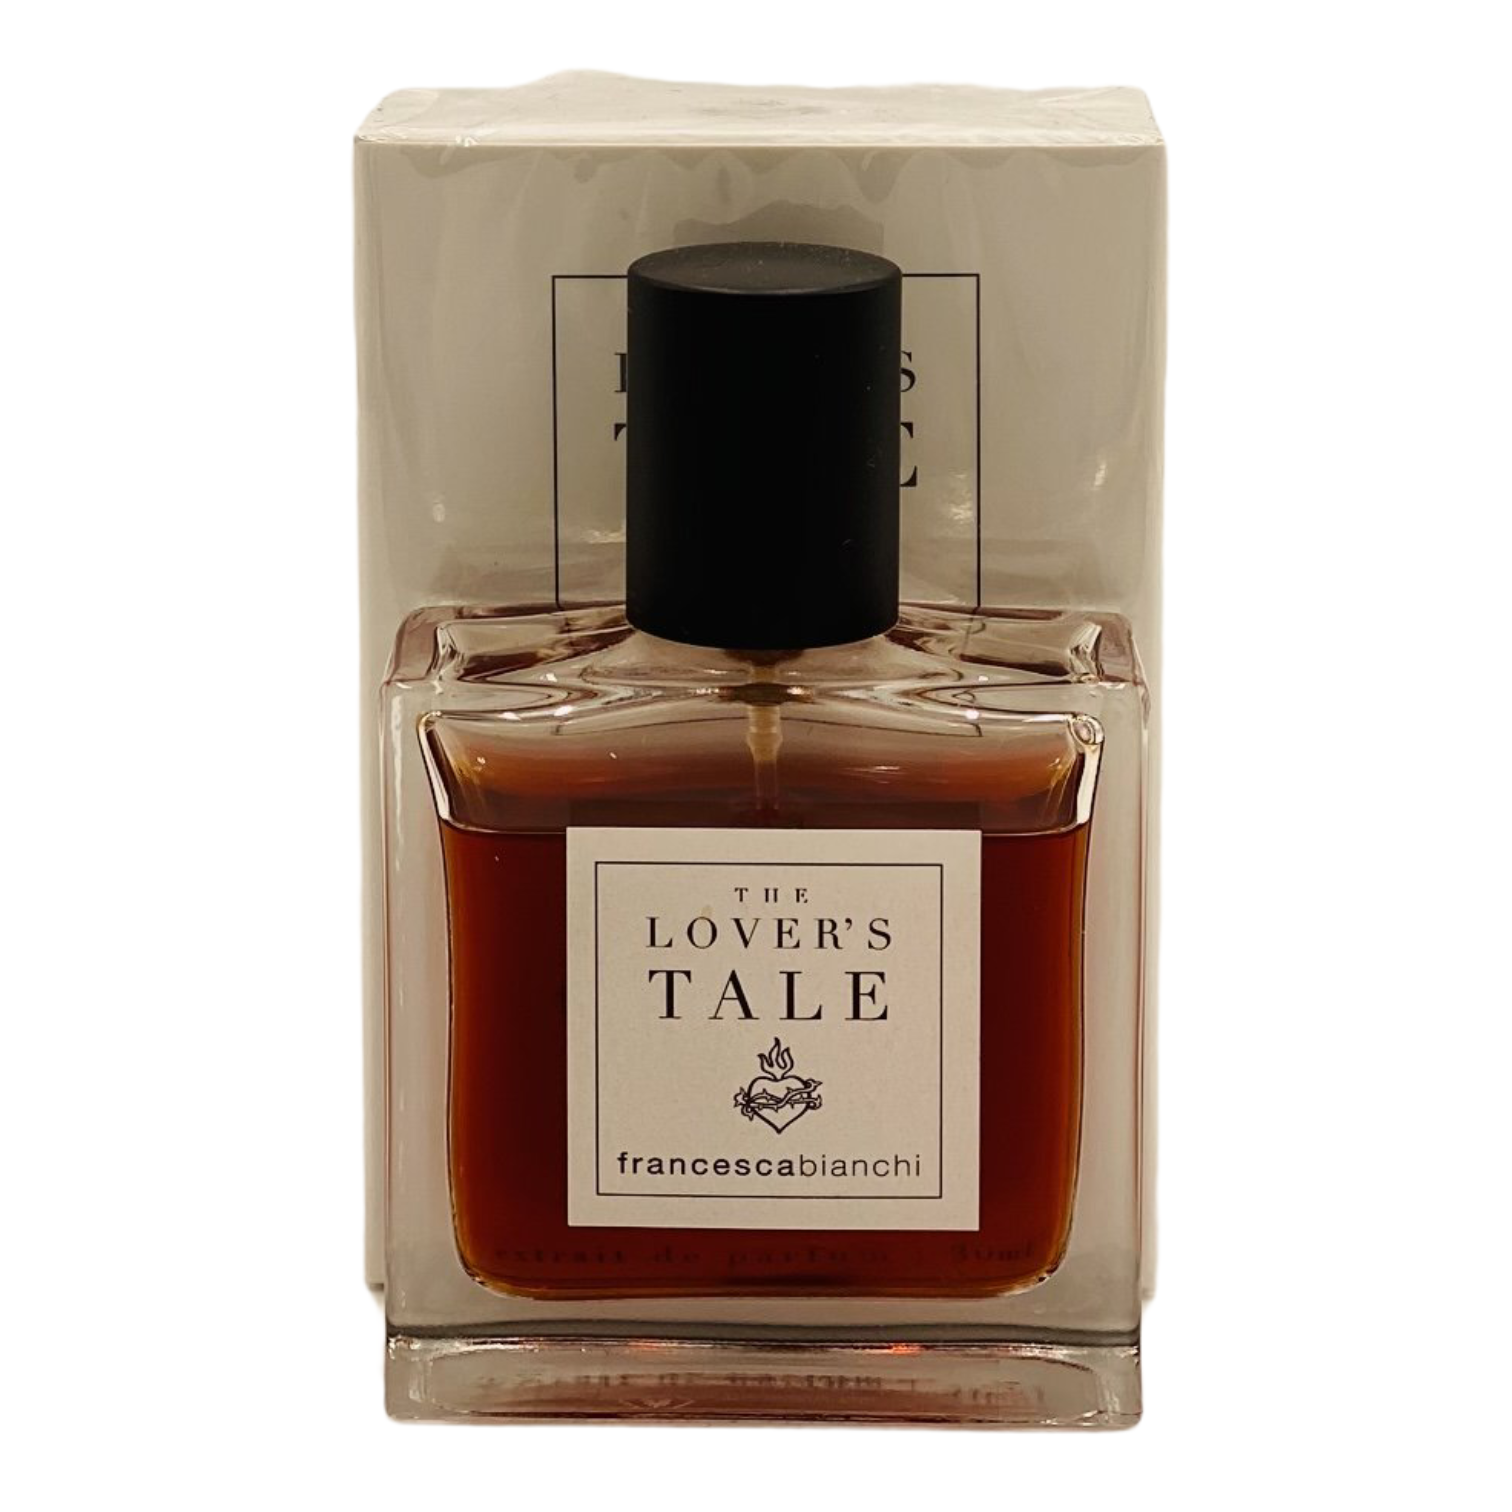 Francesca Bianchi The Lover's Tale 30ml